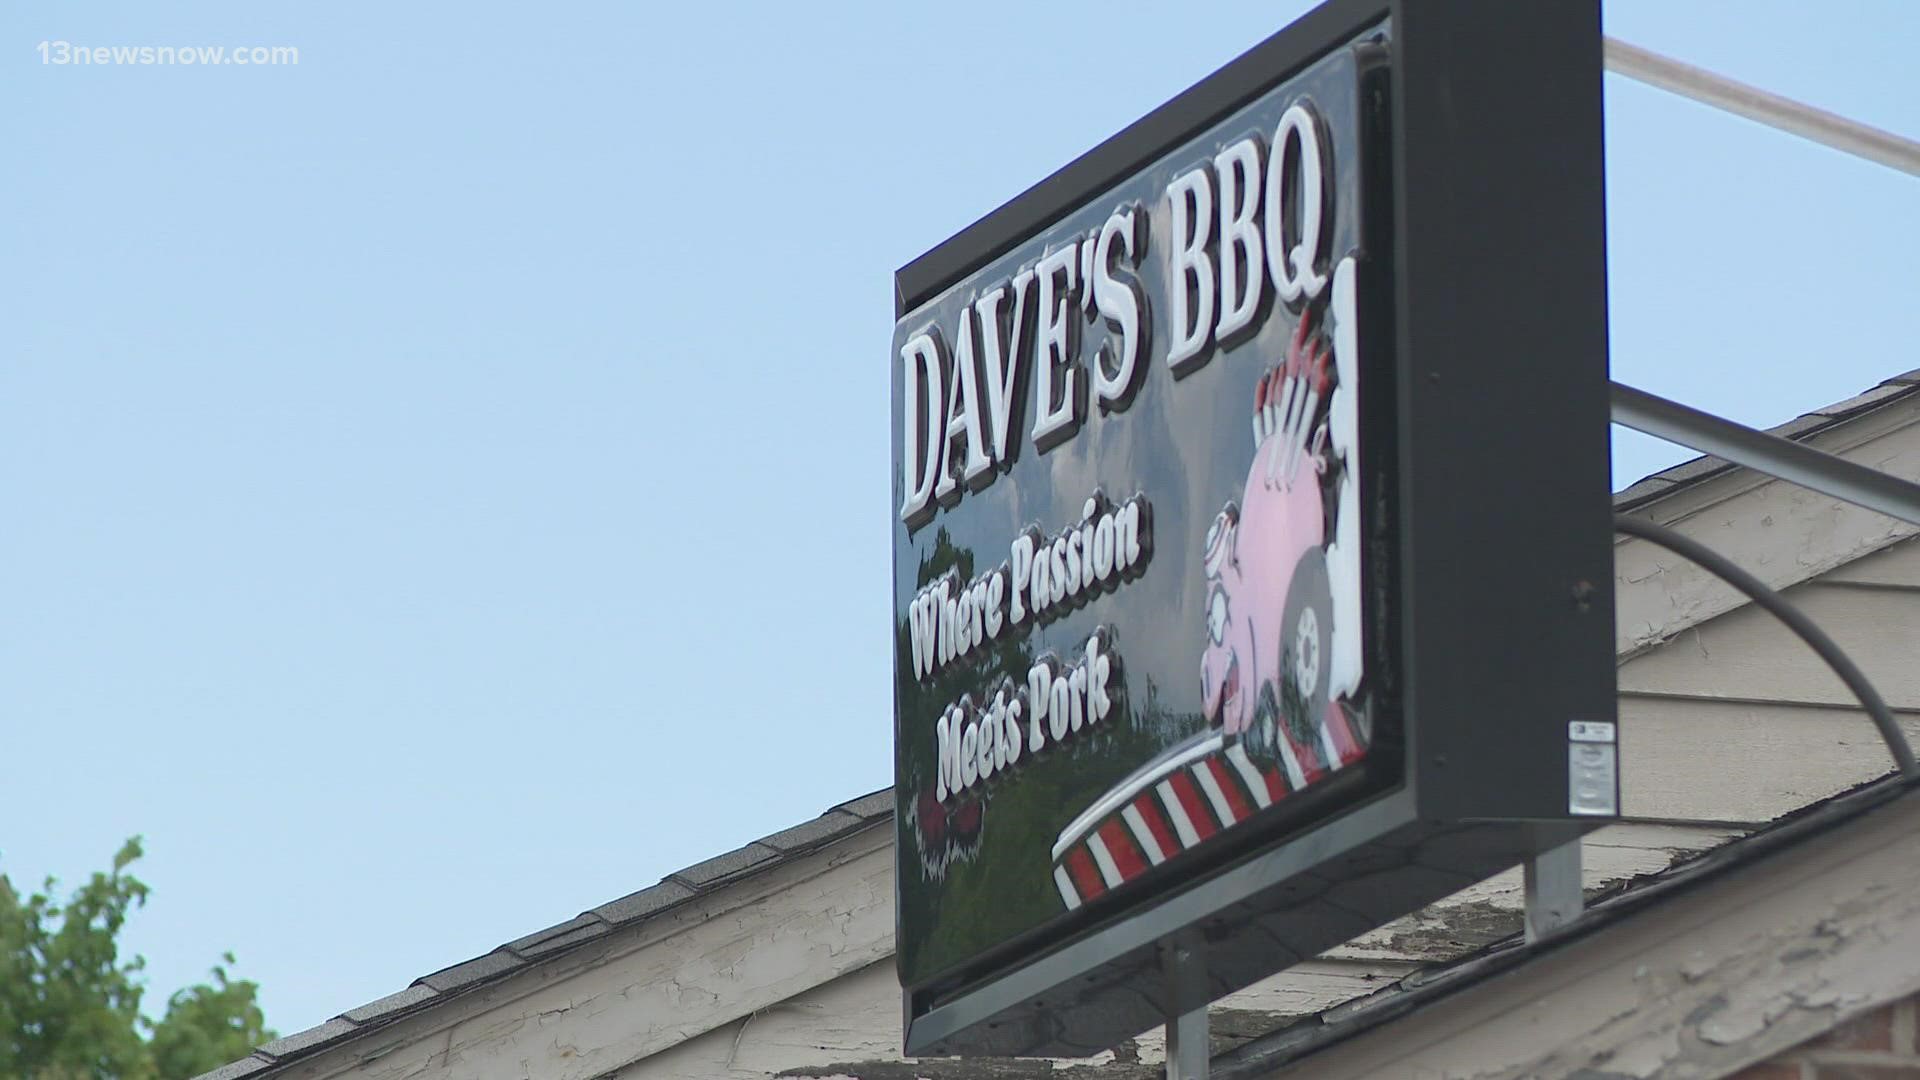 Dave's BBQ is offering a trade each Thursday starting Aug. 19 and going through Sept. 2: donate a new backpack, get a free pulled pork sandwich.